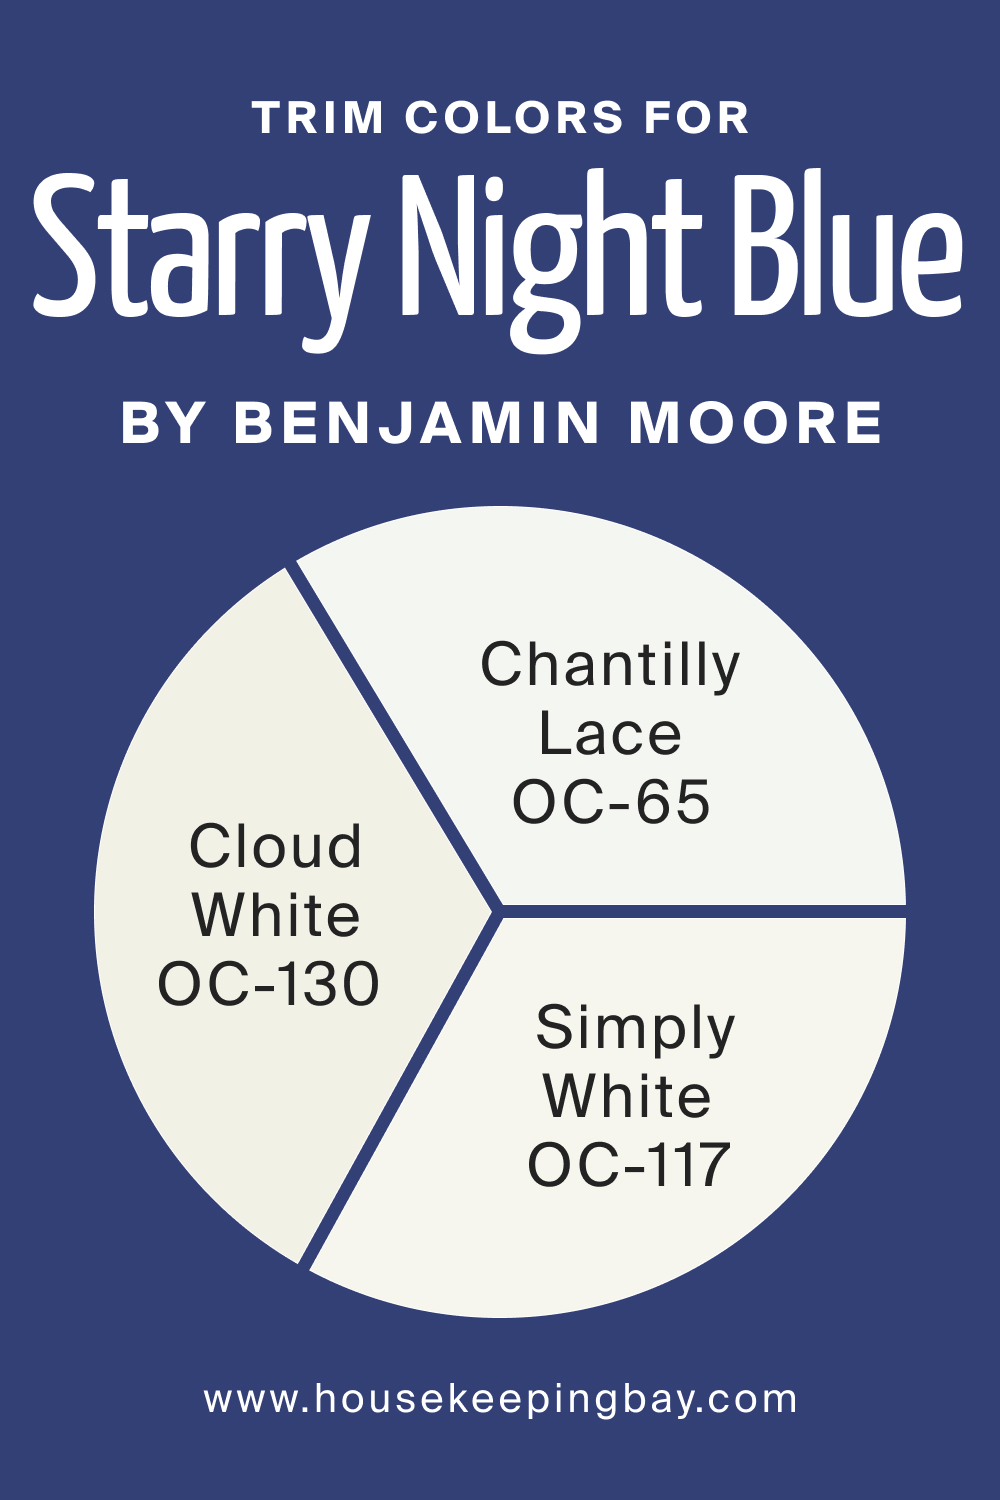 Trim Colors for Starry Night Blue 2067 20 by Benjamin Moore, www. Housekeepingbay.com